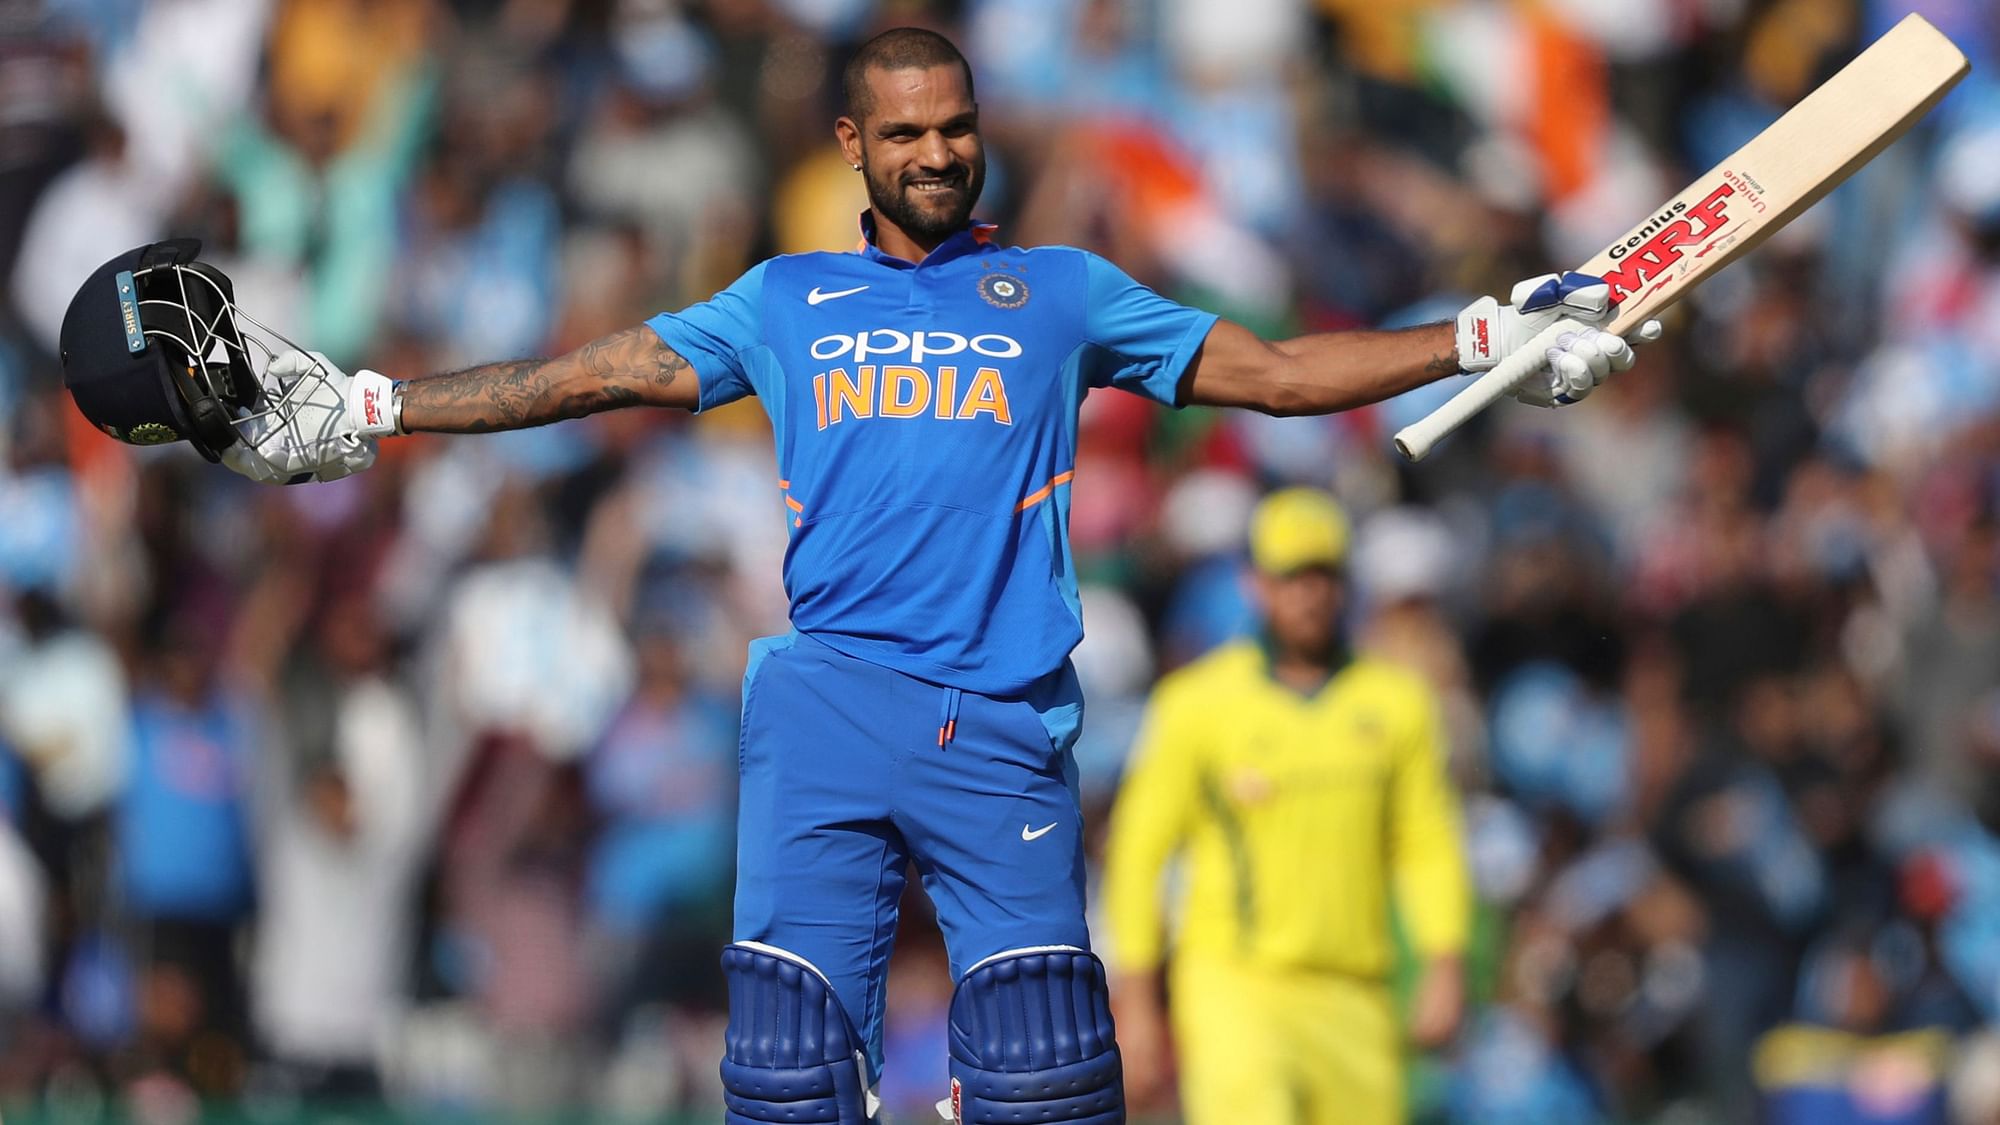 Shikhar Dhawan celebrates after reaching his 100 during the fourth ODI between India and Australia at Mohali.